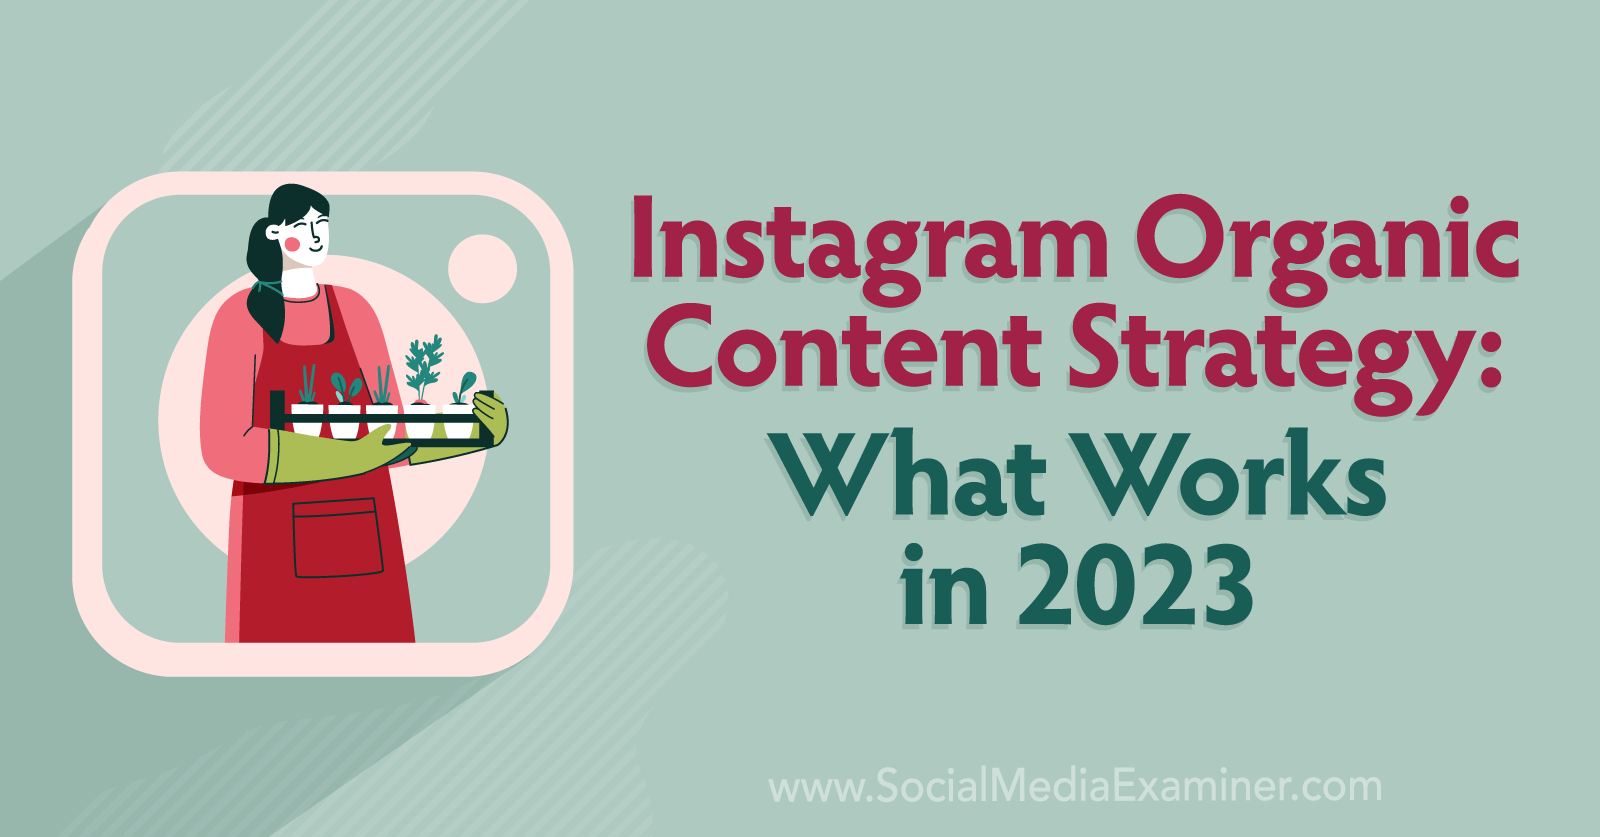 Instagram Organic Content Strategy: What Works in 2023 by Social Media Examiner